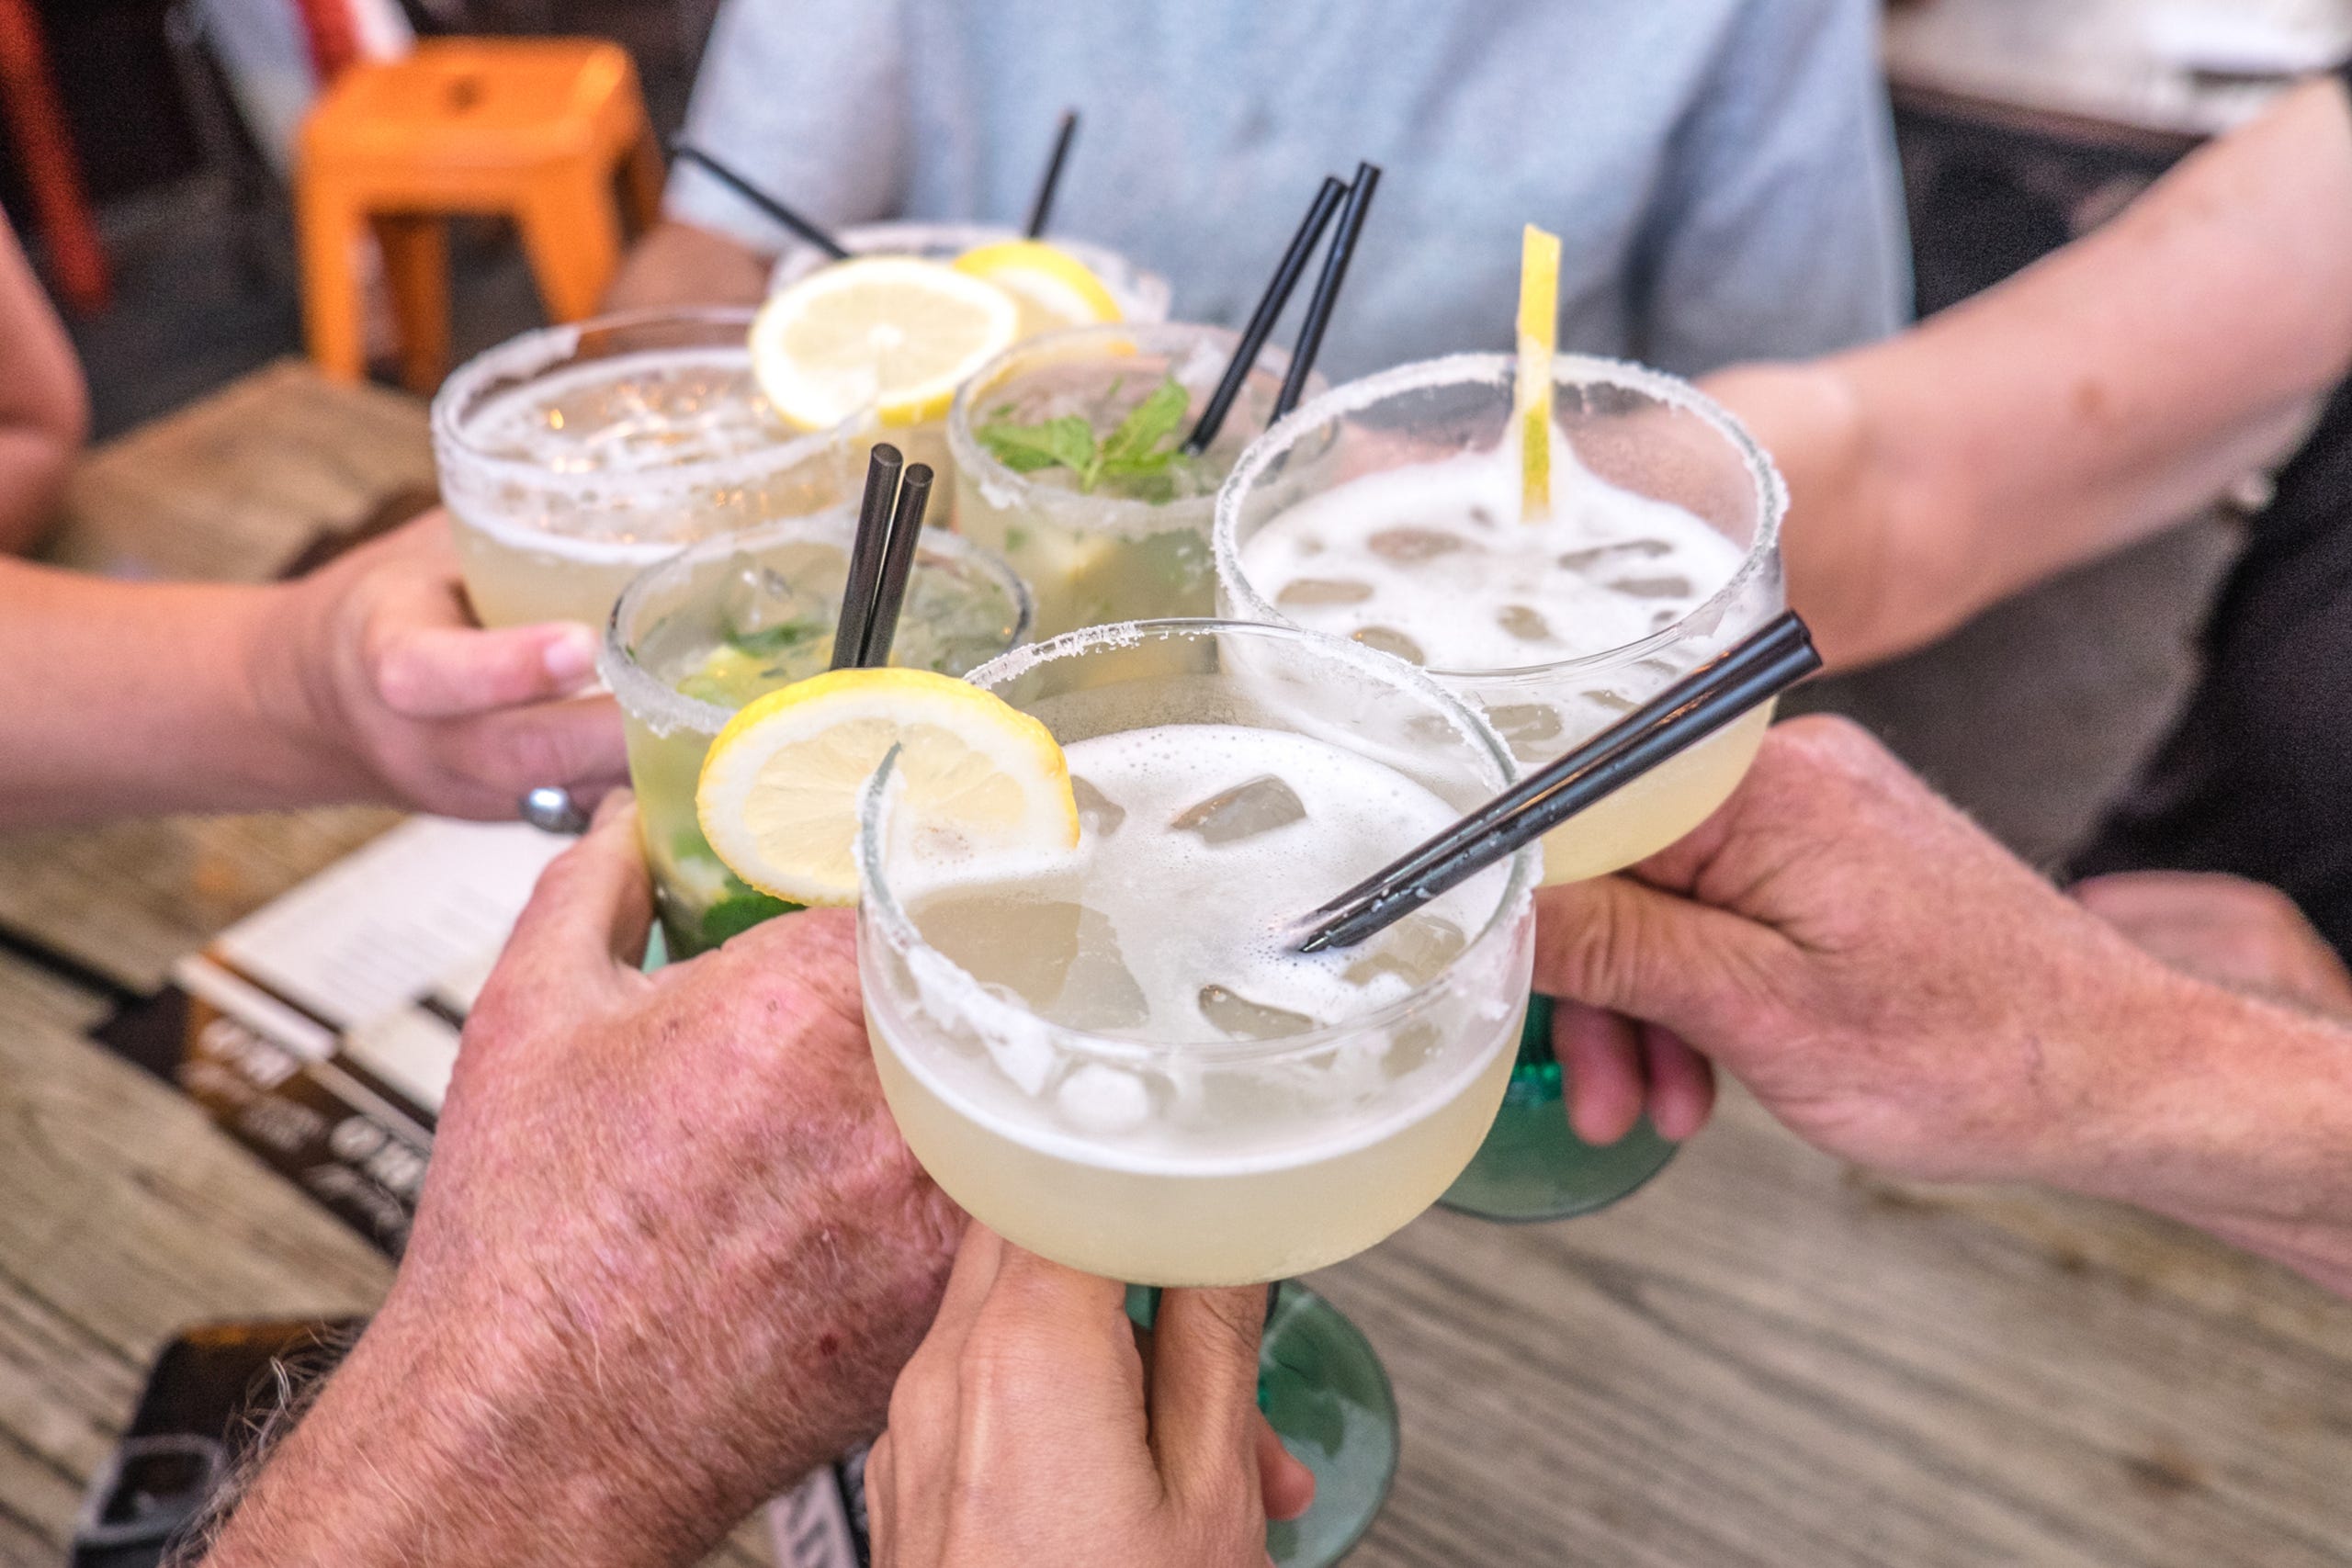 It's not that margaritas are horrible, it's that they're often made with subpar ingredients and not enough care to live up to their full potential. Here's how to fix that.